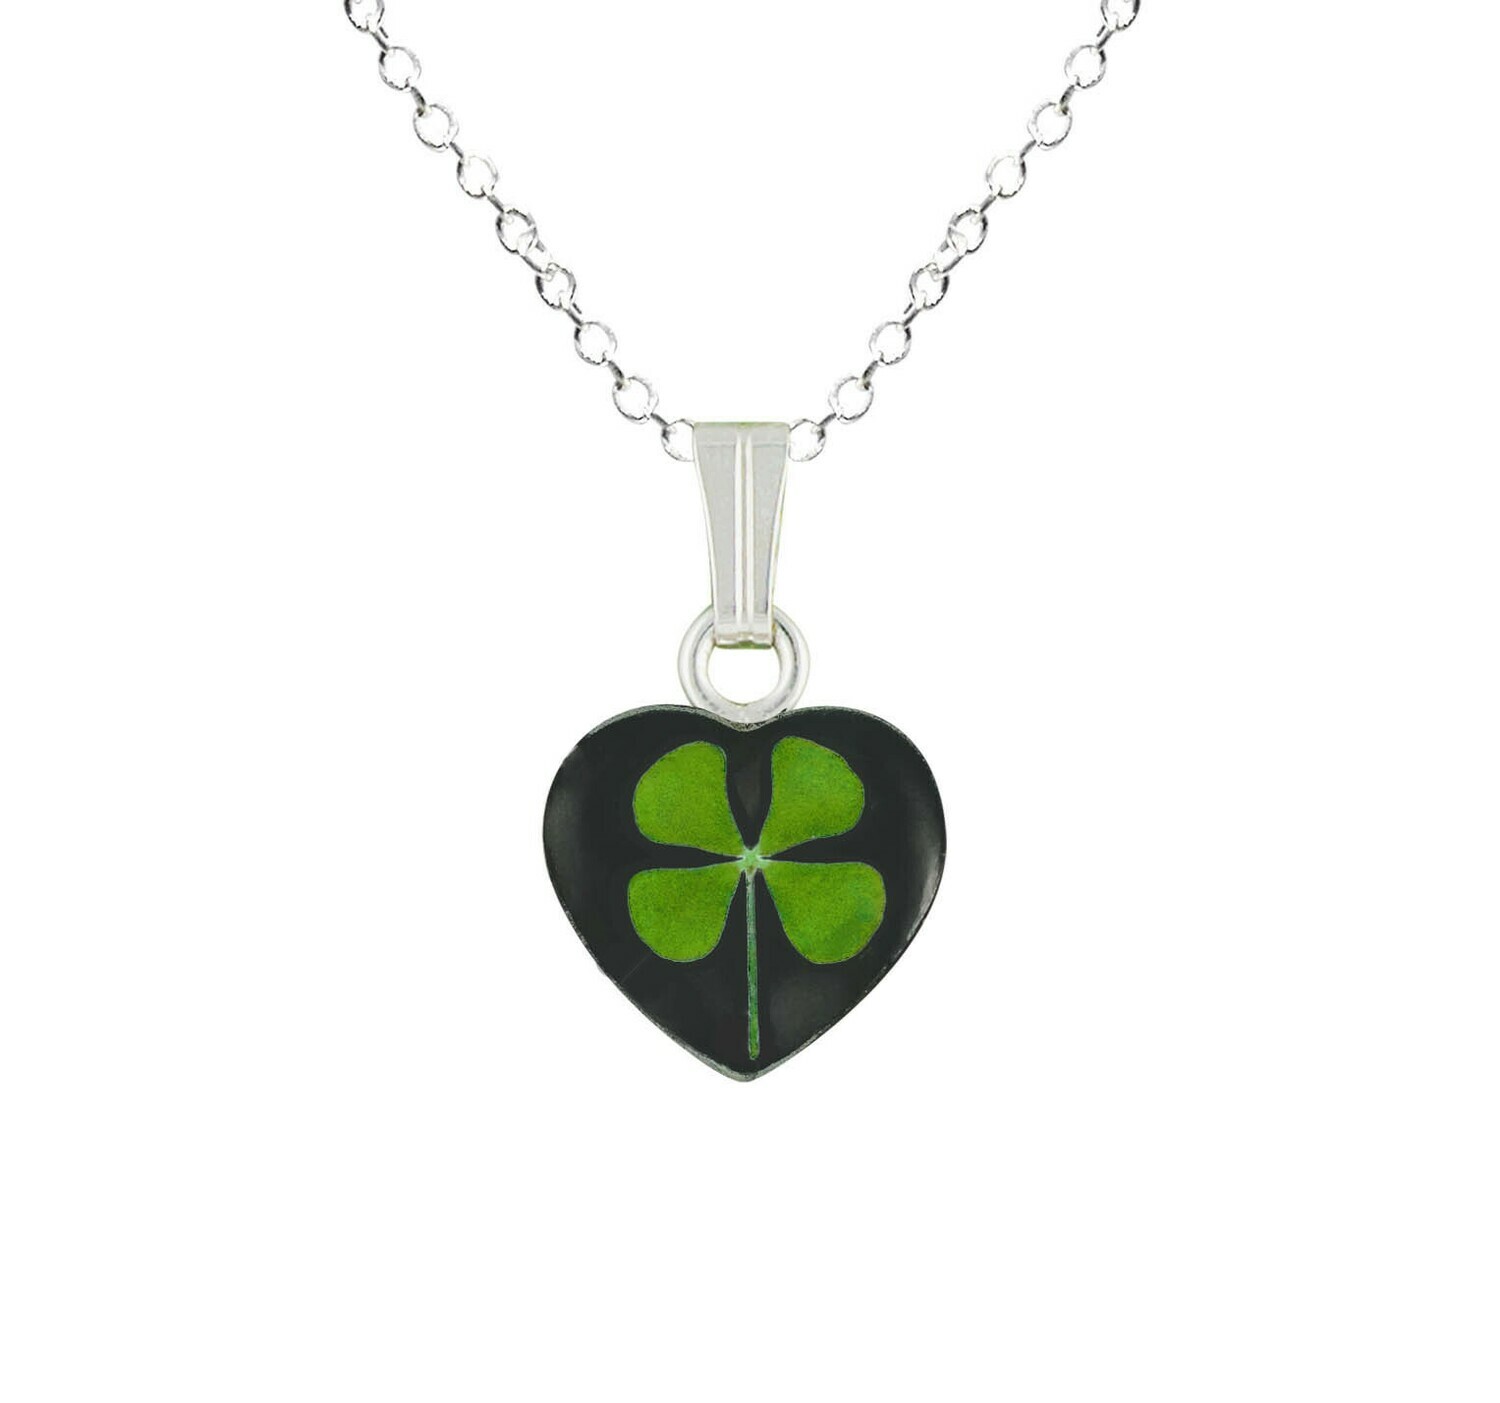 Clover Necklace, Small Heart, Black Background